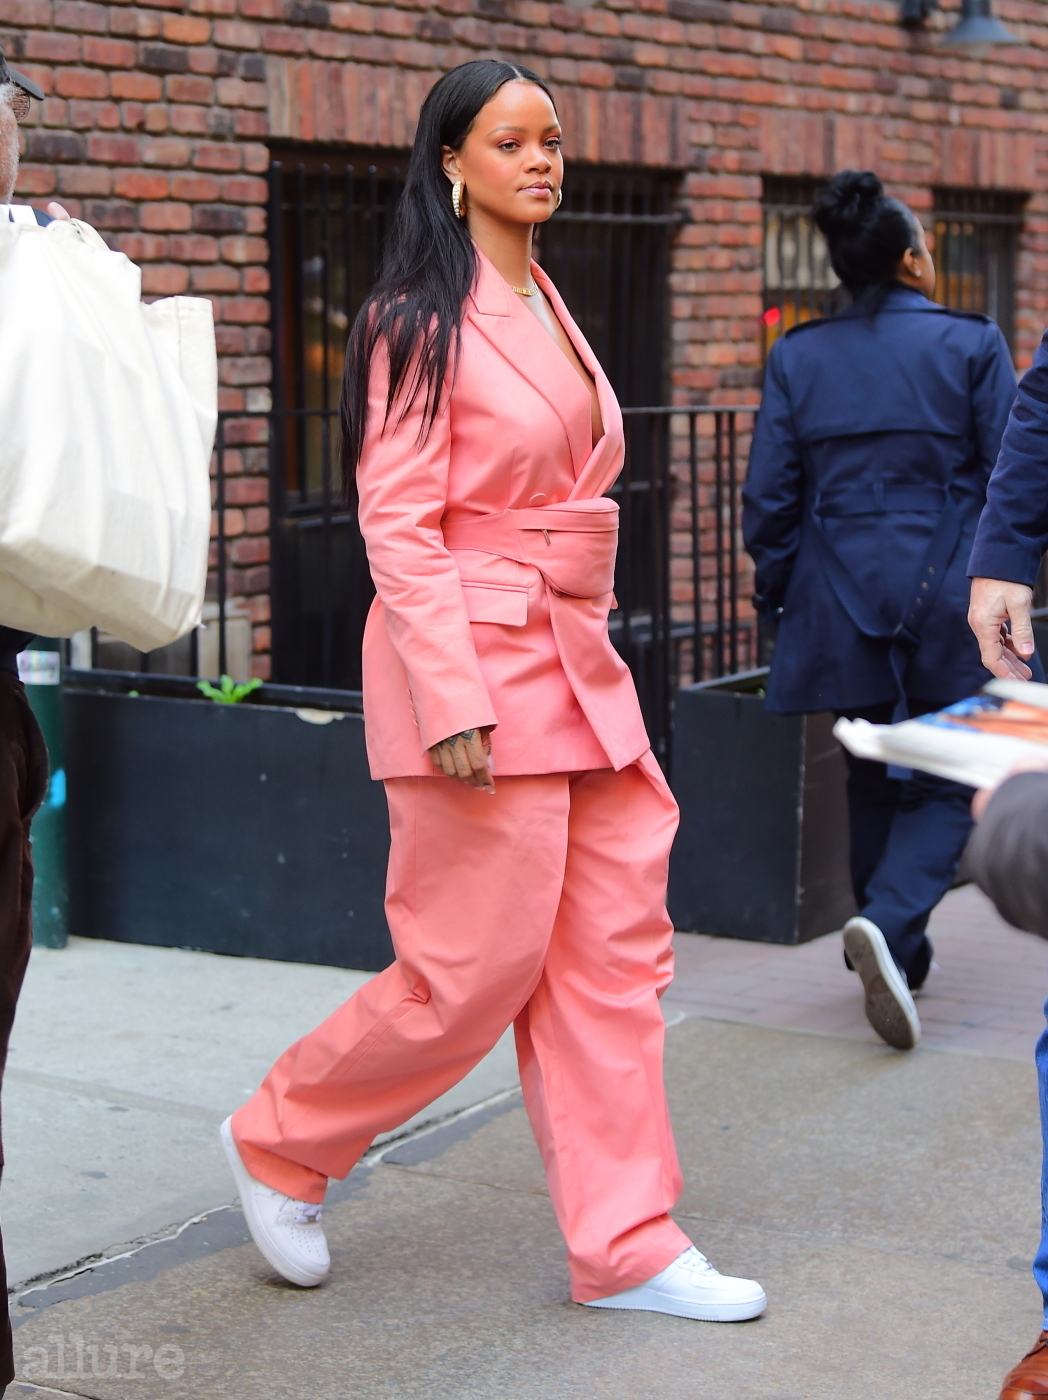 EXCLUSIVE: Rihanna Leaves Business Lunch Wearing Chic Oversized Coral Pant Suit . She looked amazing in a casual oversized pant suit with a matching fanny pack. She stopped to sign autographs for a fan before hopping into her SUV. Pictured: Rihanna Ref: SPL5080727 170419 EXCLUSIVE Picture by: DIGGZY / SplashNews.com Splash News and Pictures Los Angeles: 310-821-2666 New York: 212-619-2666 London: 0207 644 7656 Milan: 02 4399 8577 photodesk@splashnews.com World Rights, No Portugal Rights